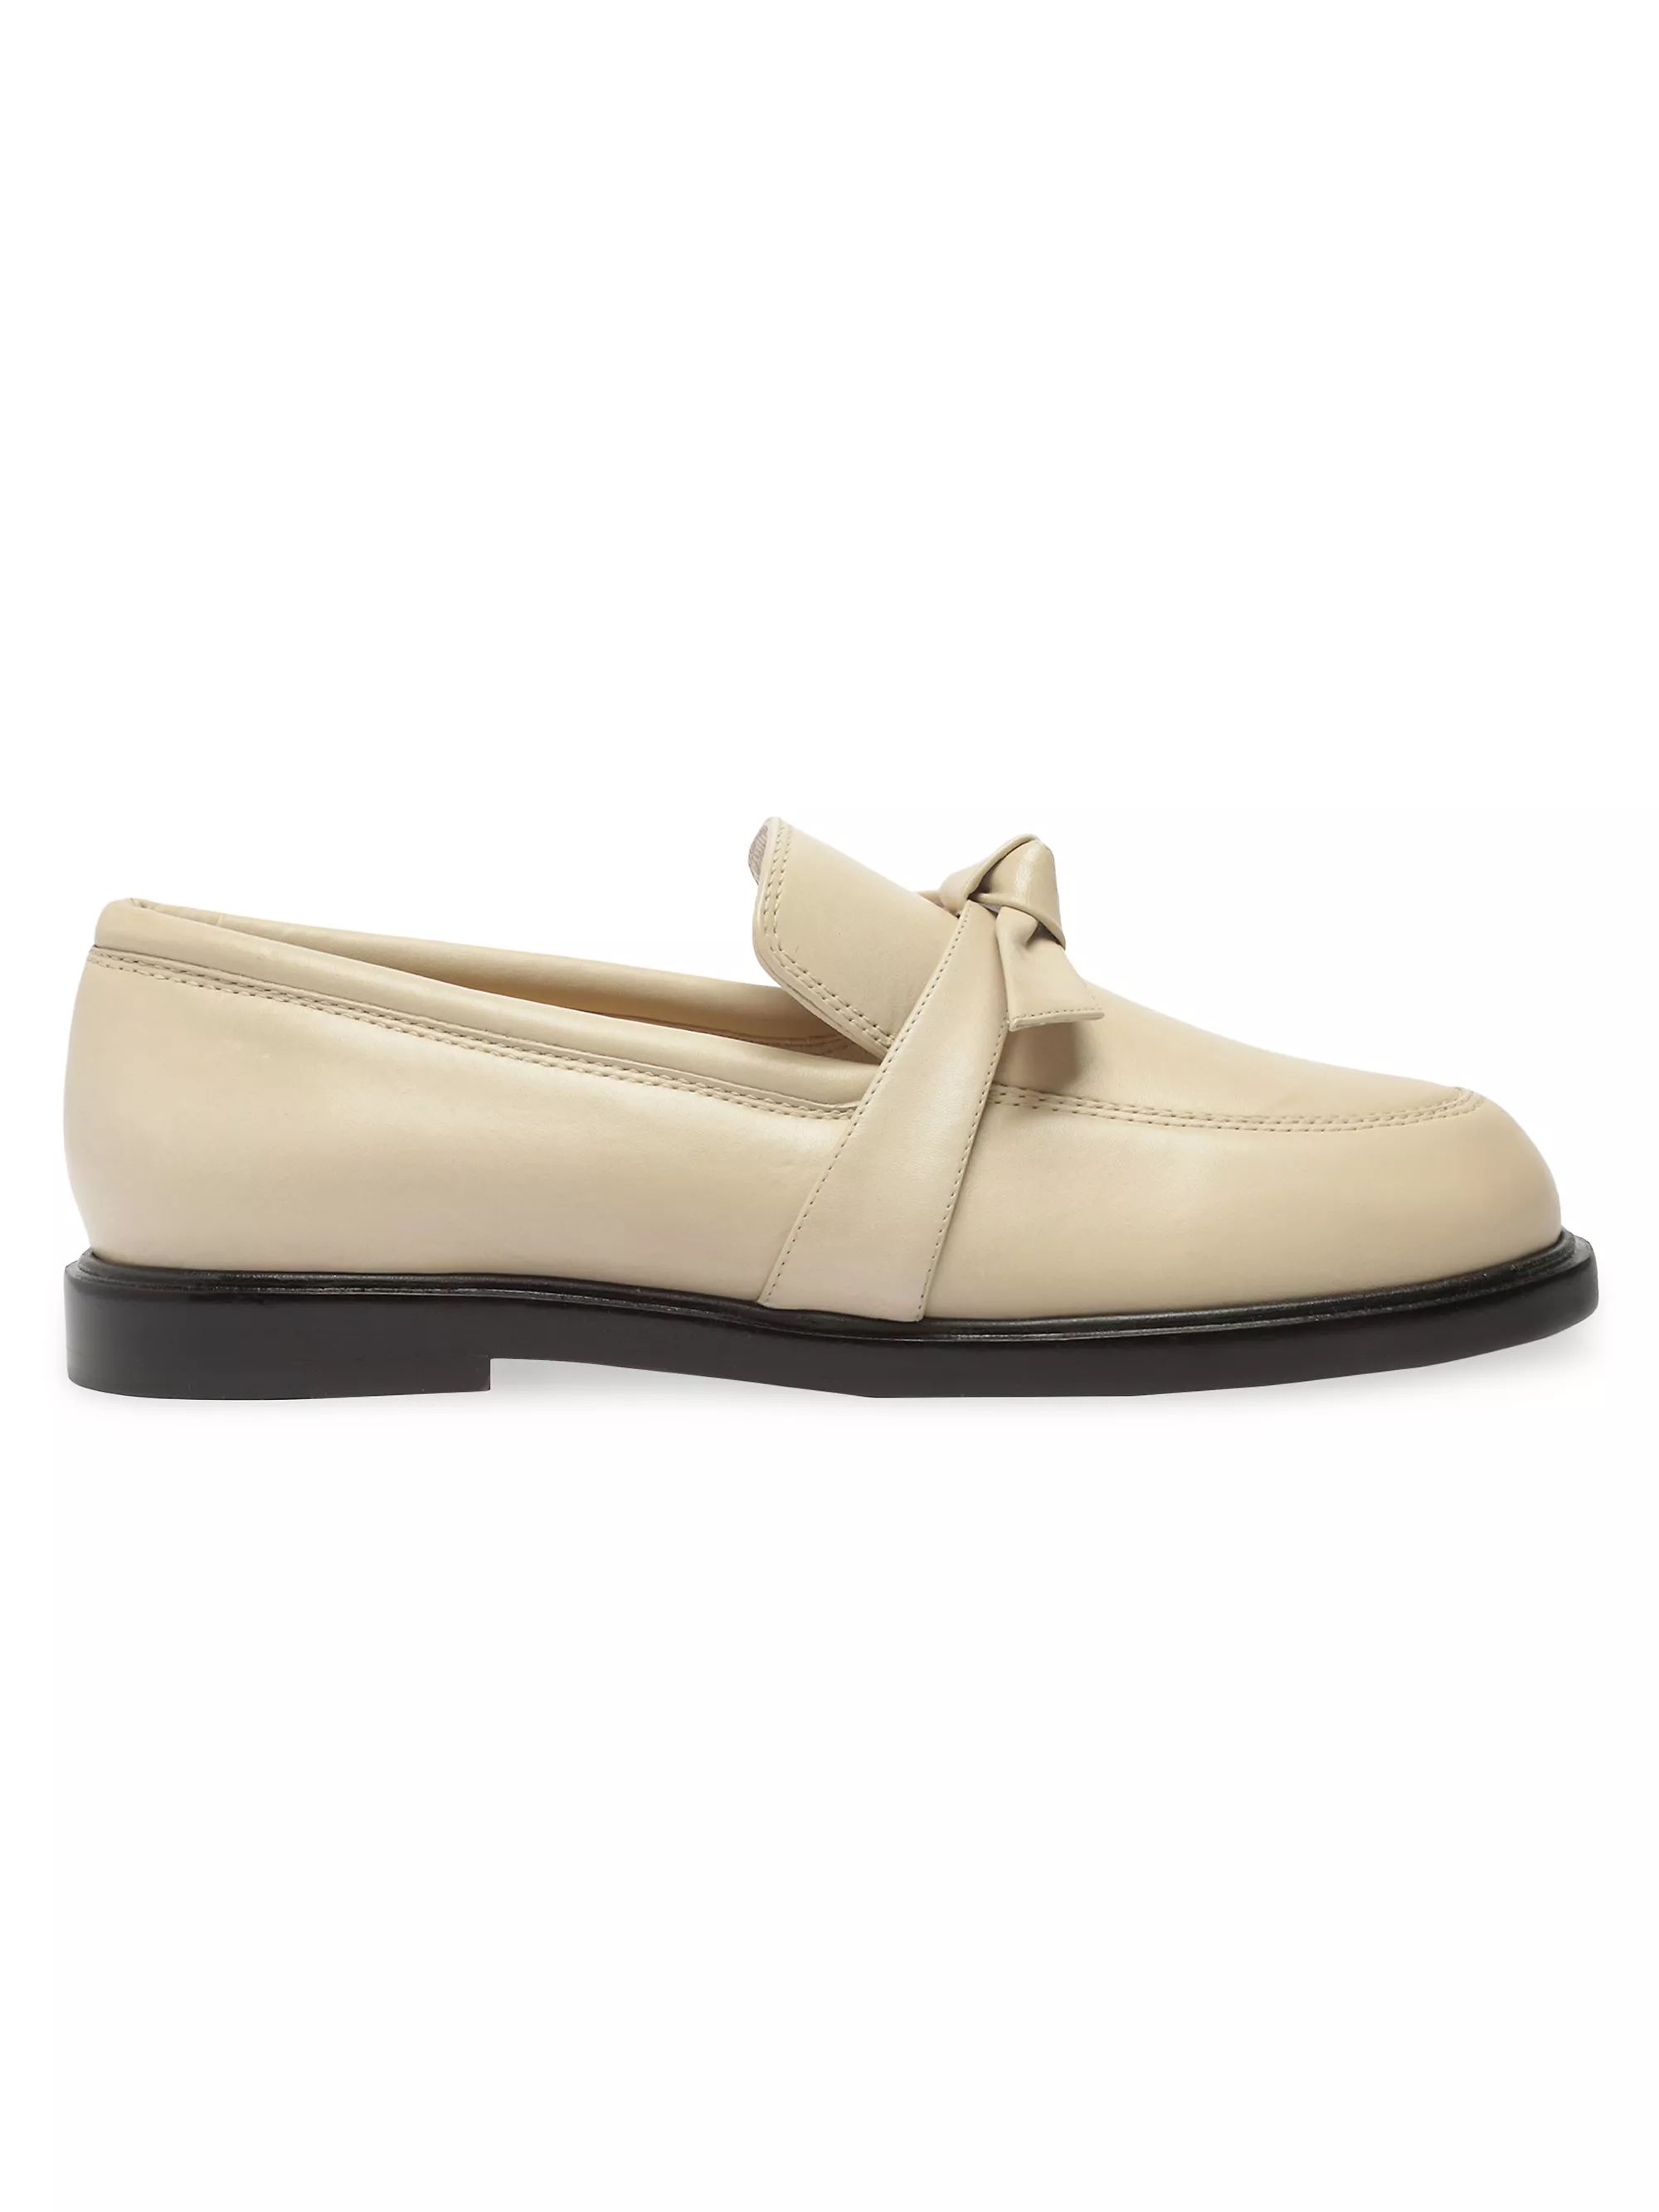 Clarita Leather Bow Loafers | Saks Fifth Avenue